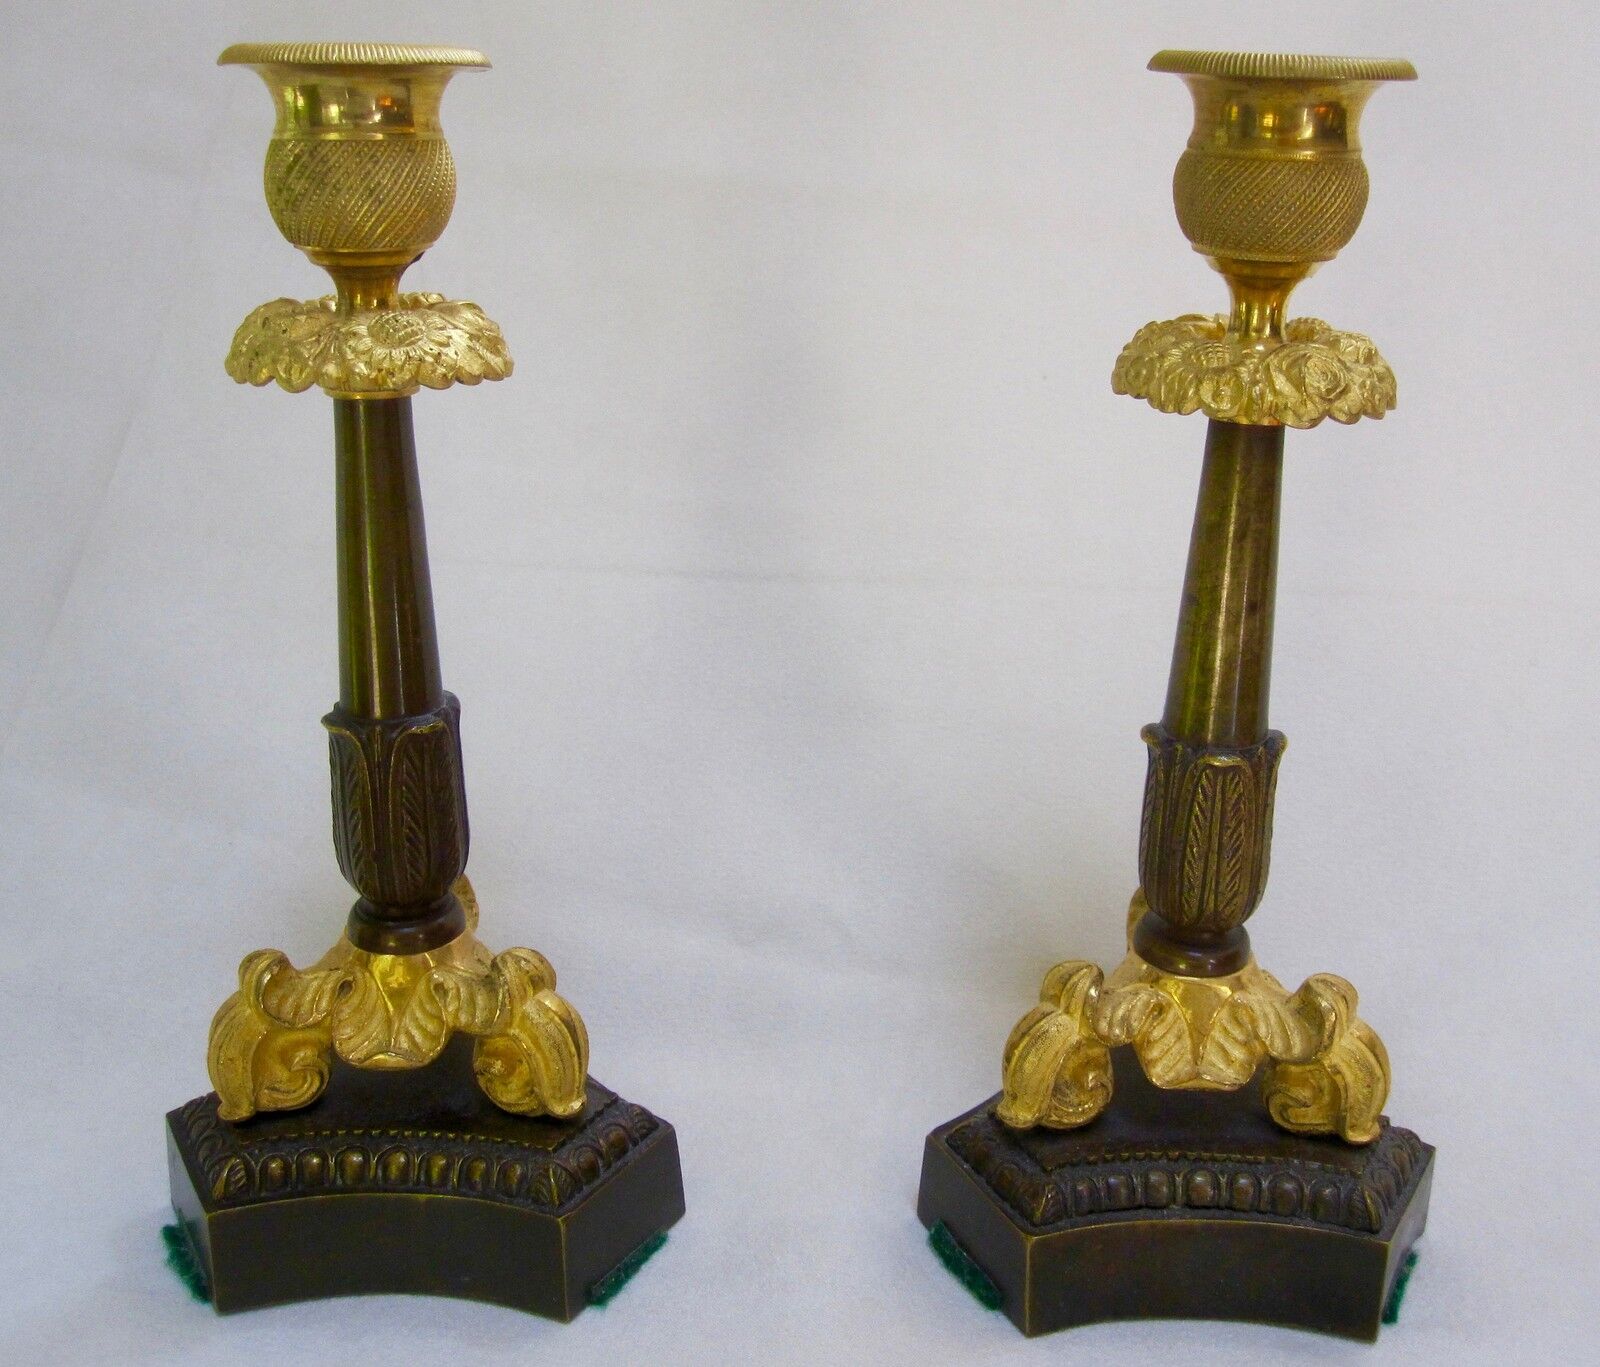 AUTHENTIC 19TH CENTURY FRENCH GILT & PATINATED BRONZE CANDLESTICKS (PR)